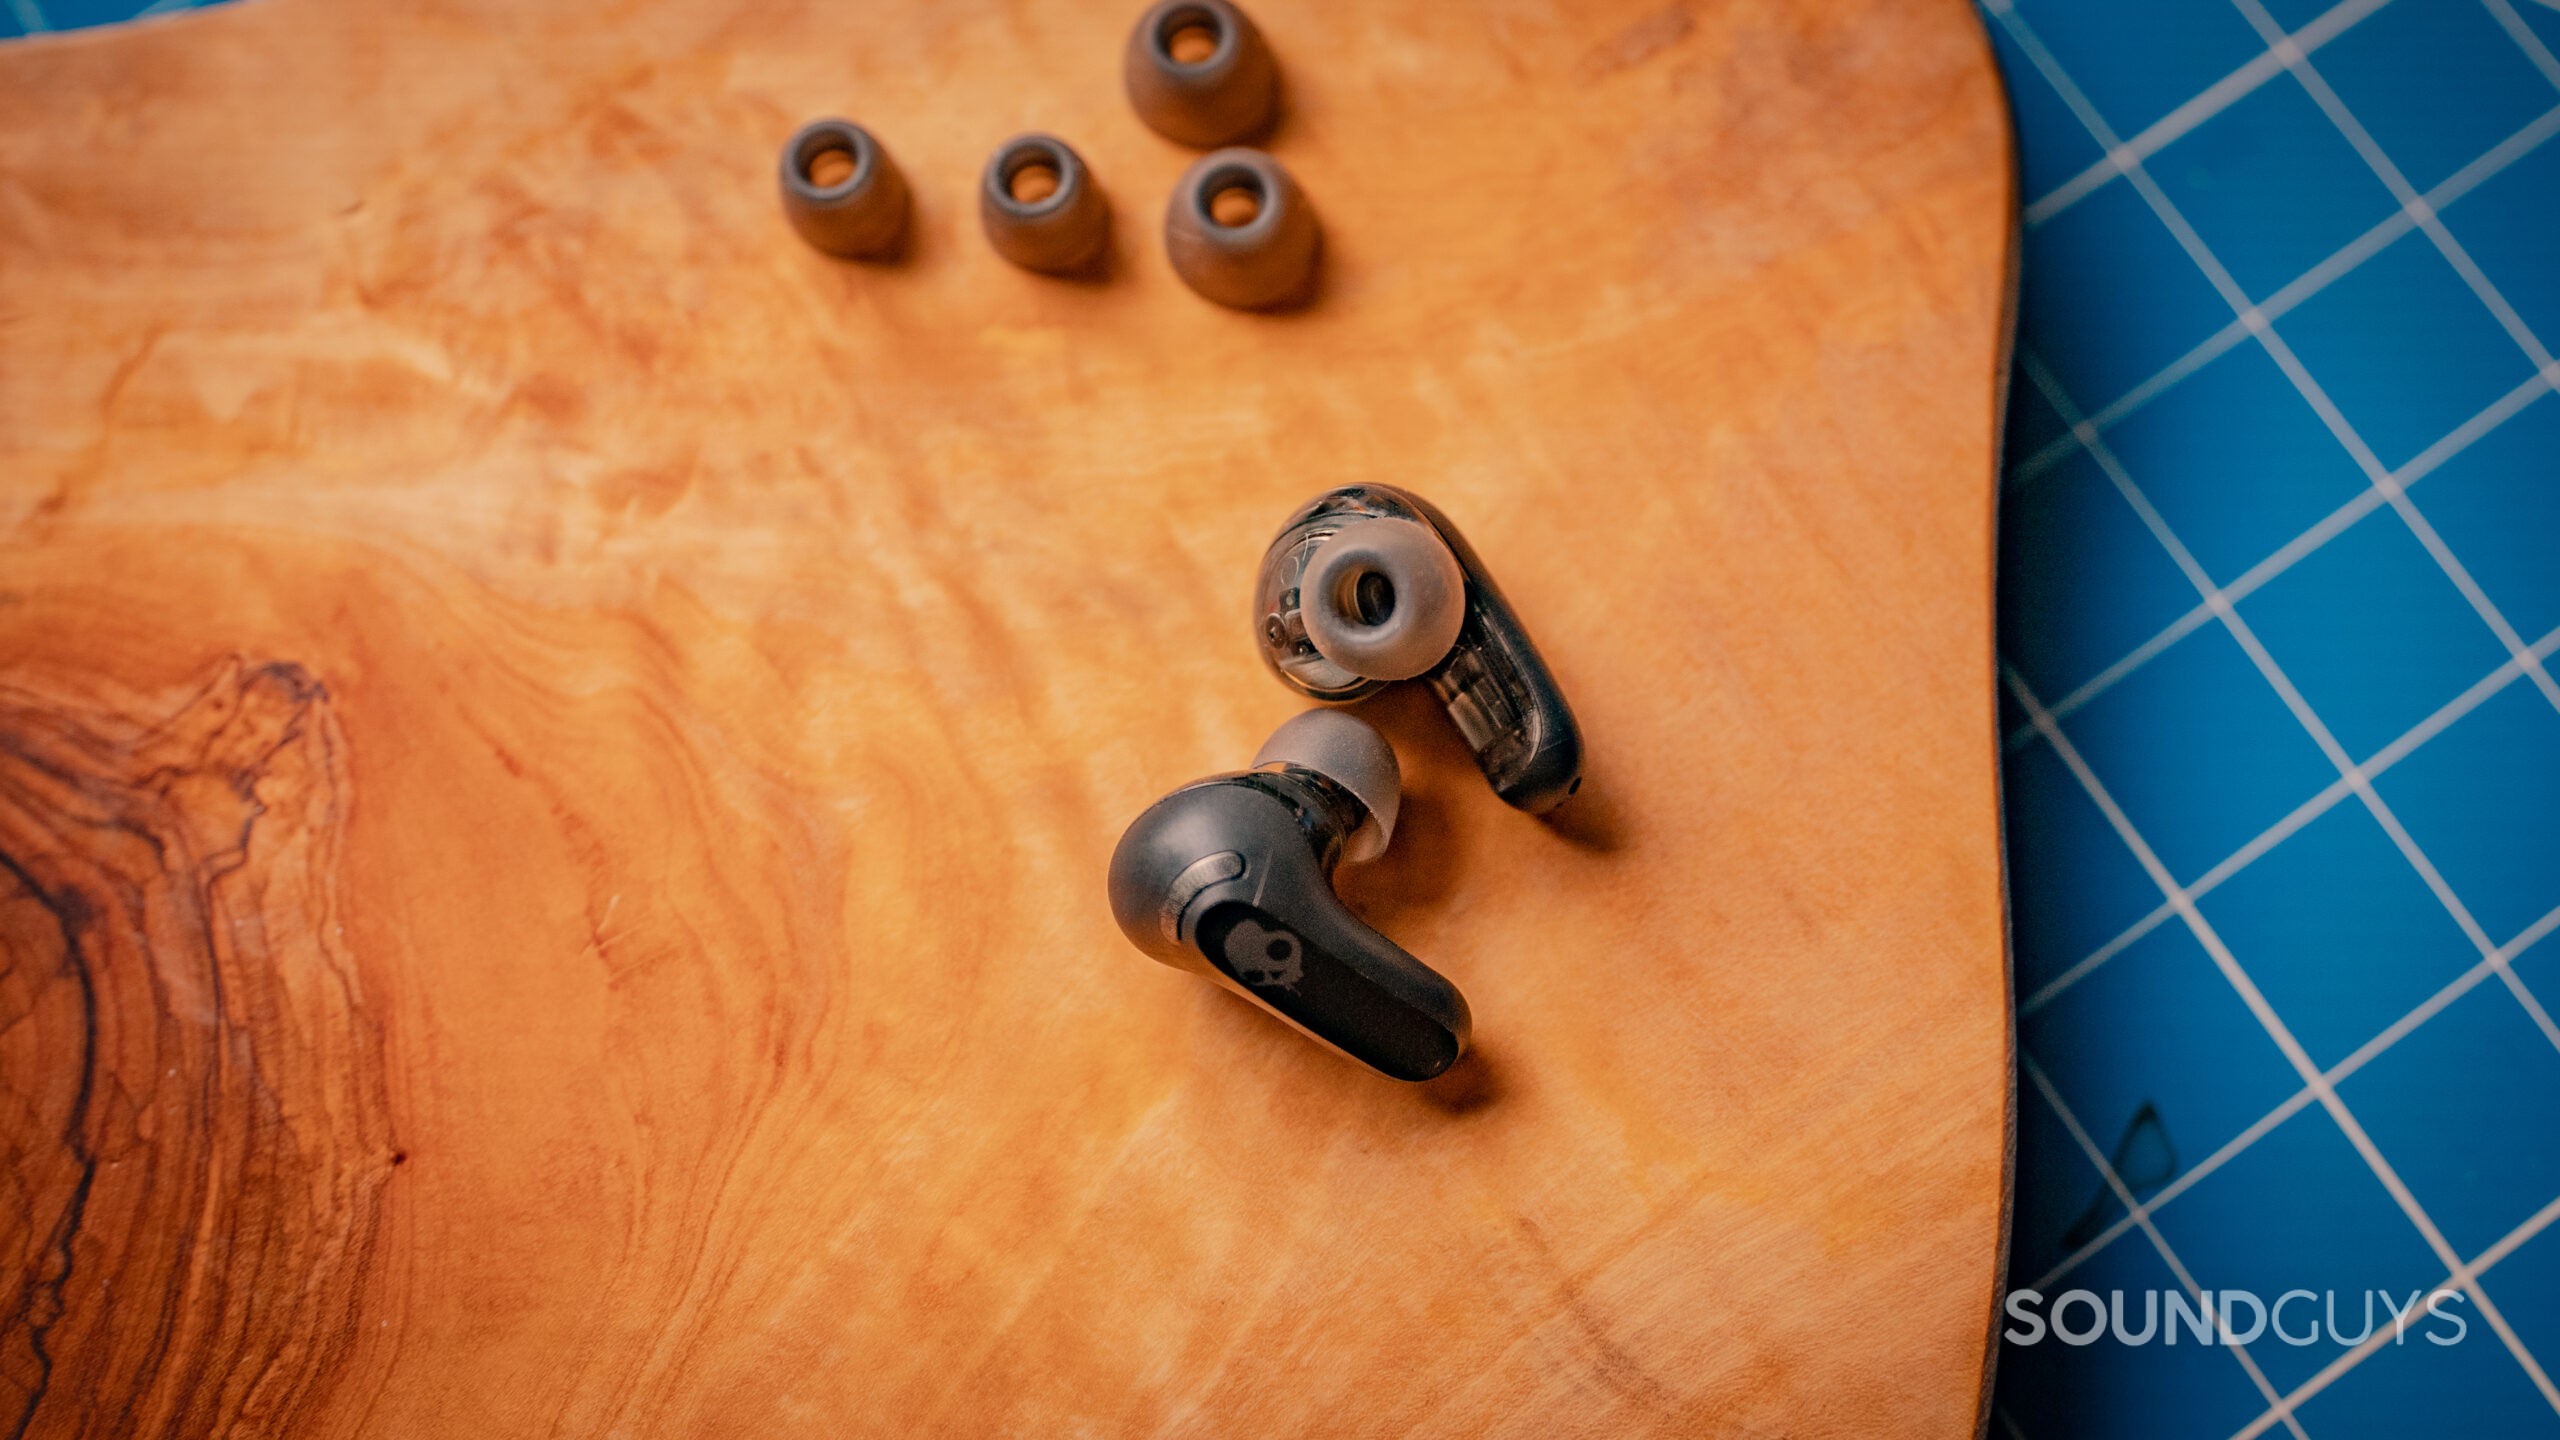 A close up the Skullcandy Rail ANC buds on a wood surface with accompanying spare ear tips.